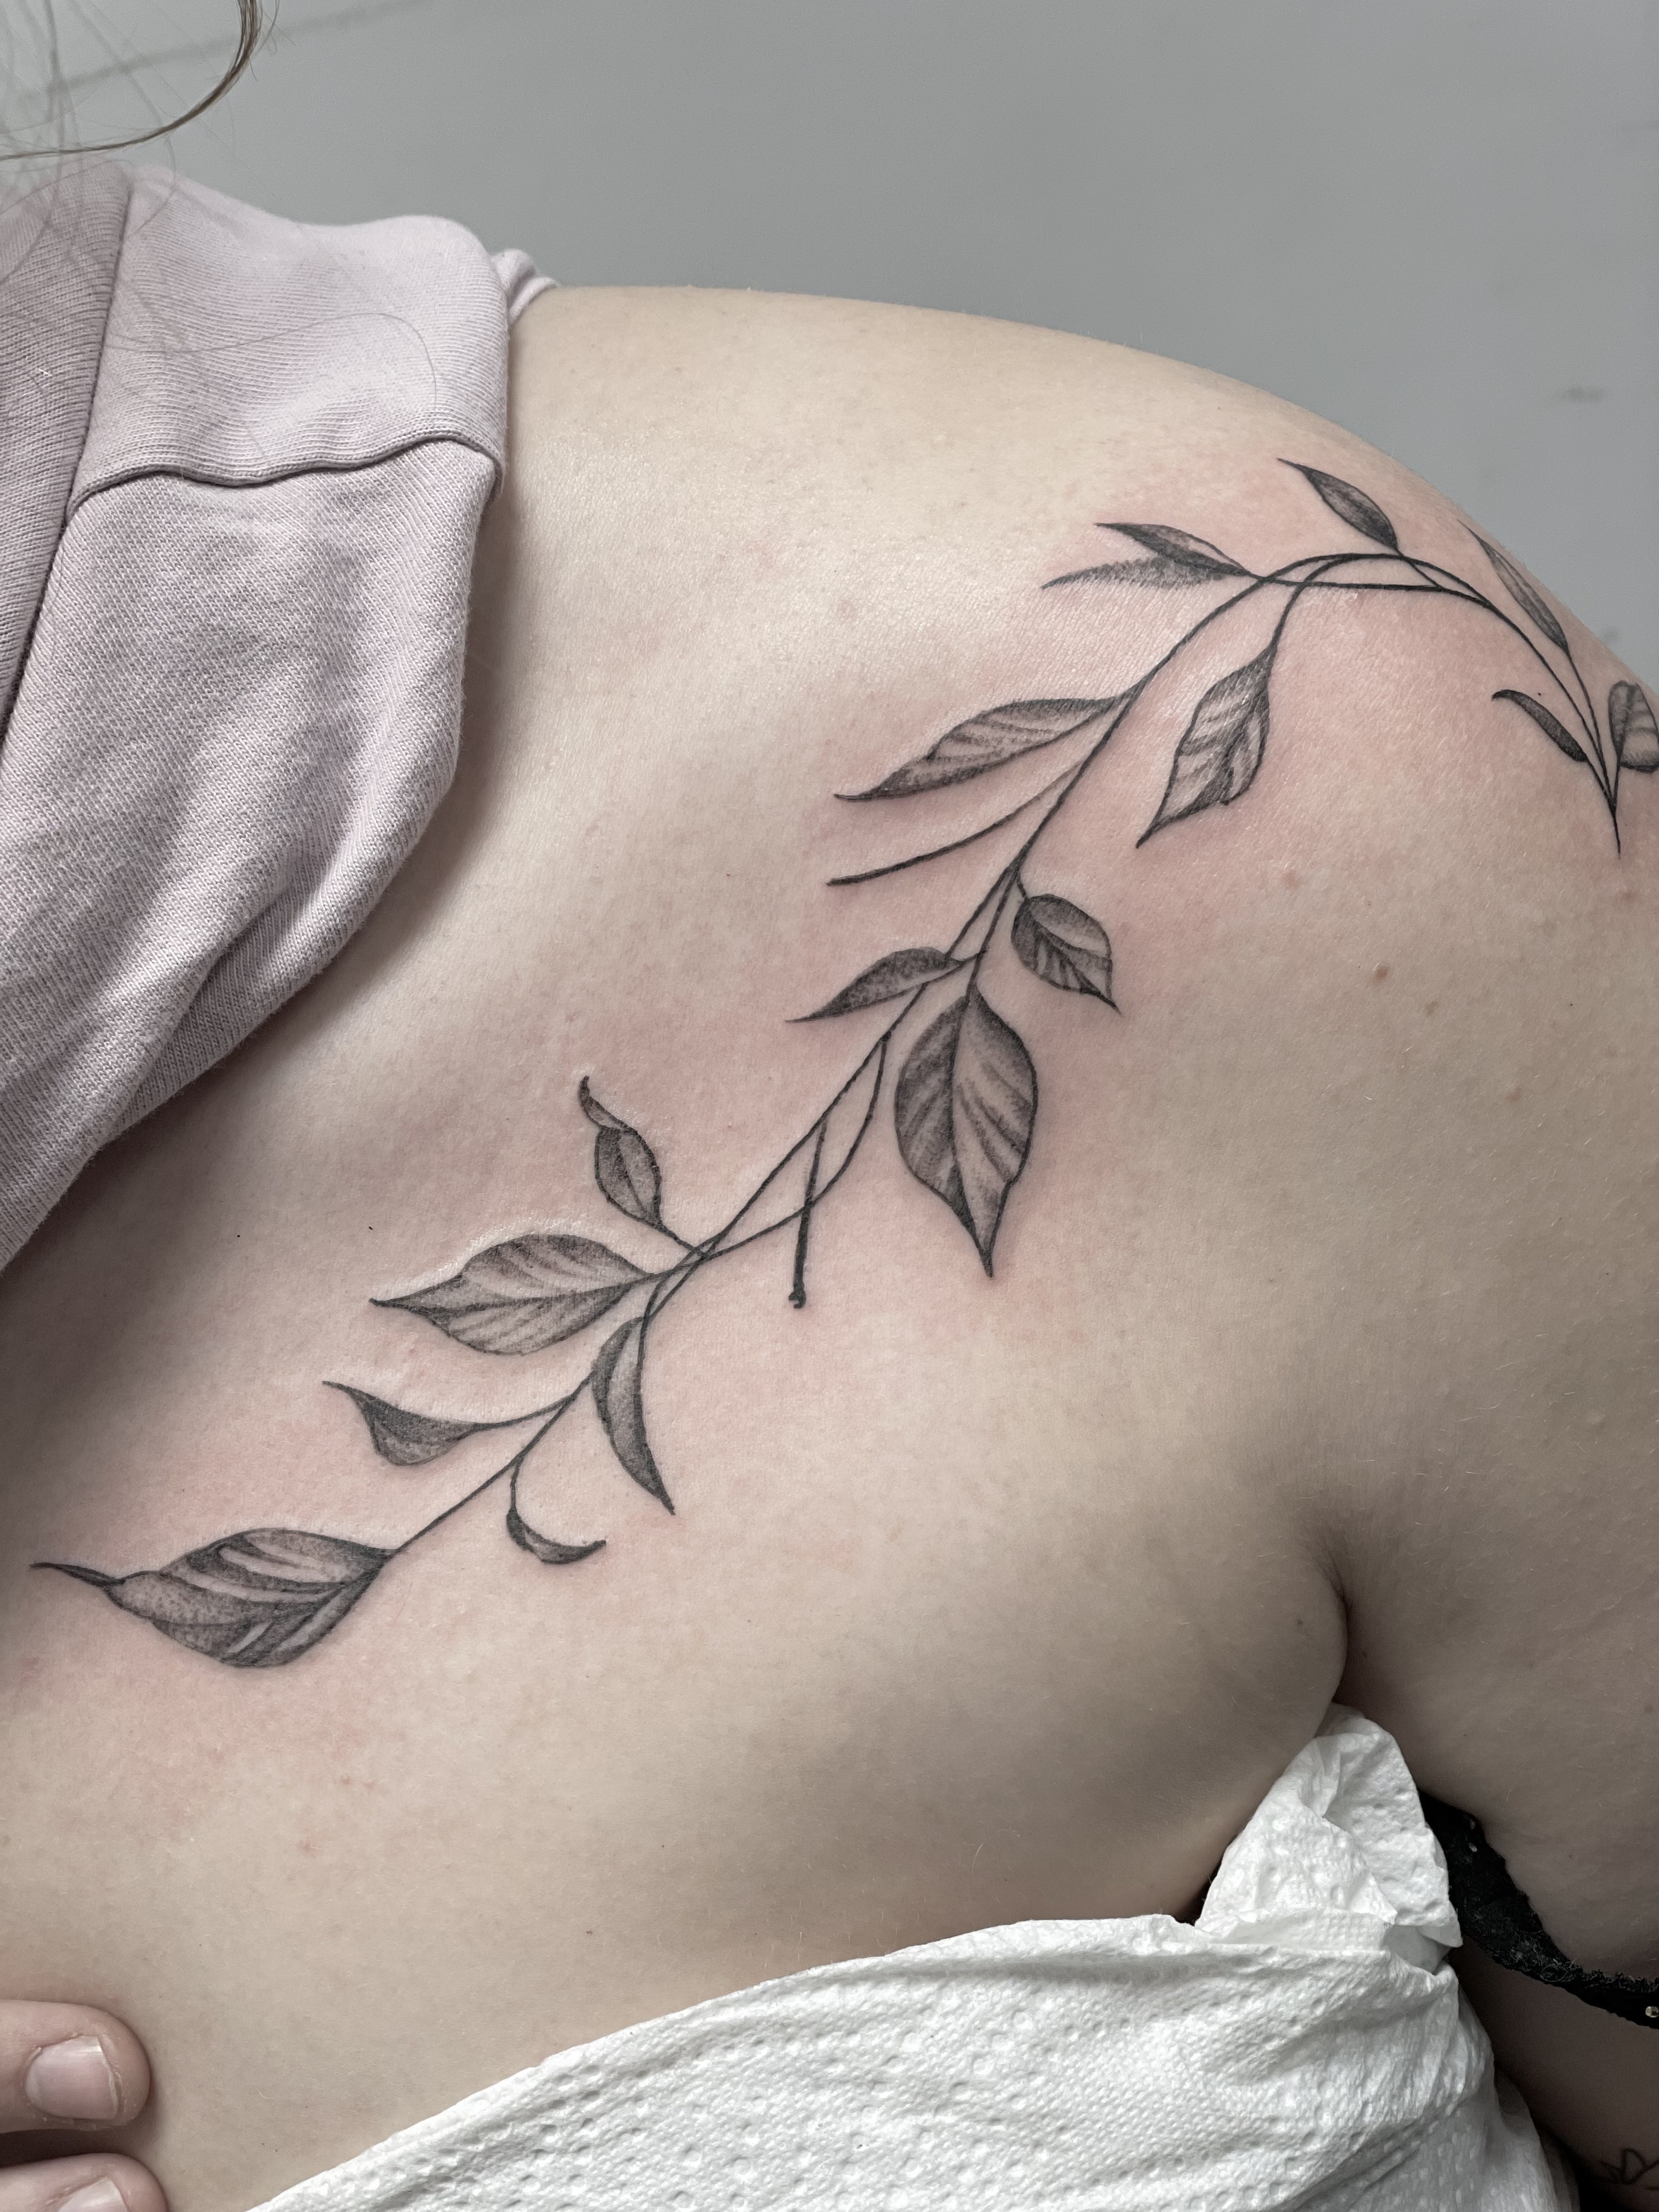 Start on a back piece Black and grey shade tattoo Realism tattoo Sparrow  with vintage flowers tattoo Vi  Vintage flower tattoo Tattoos Vintage  style tattoos